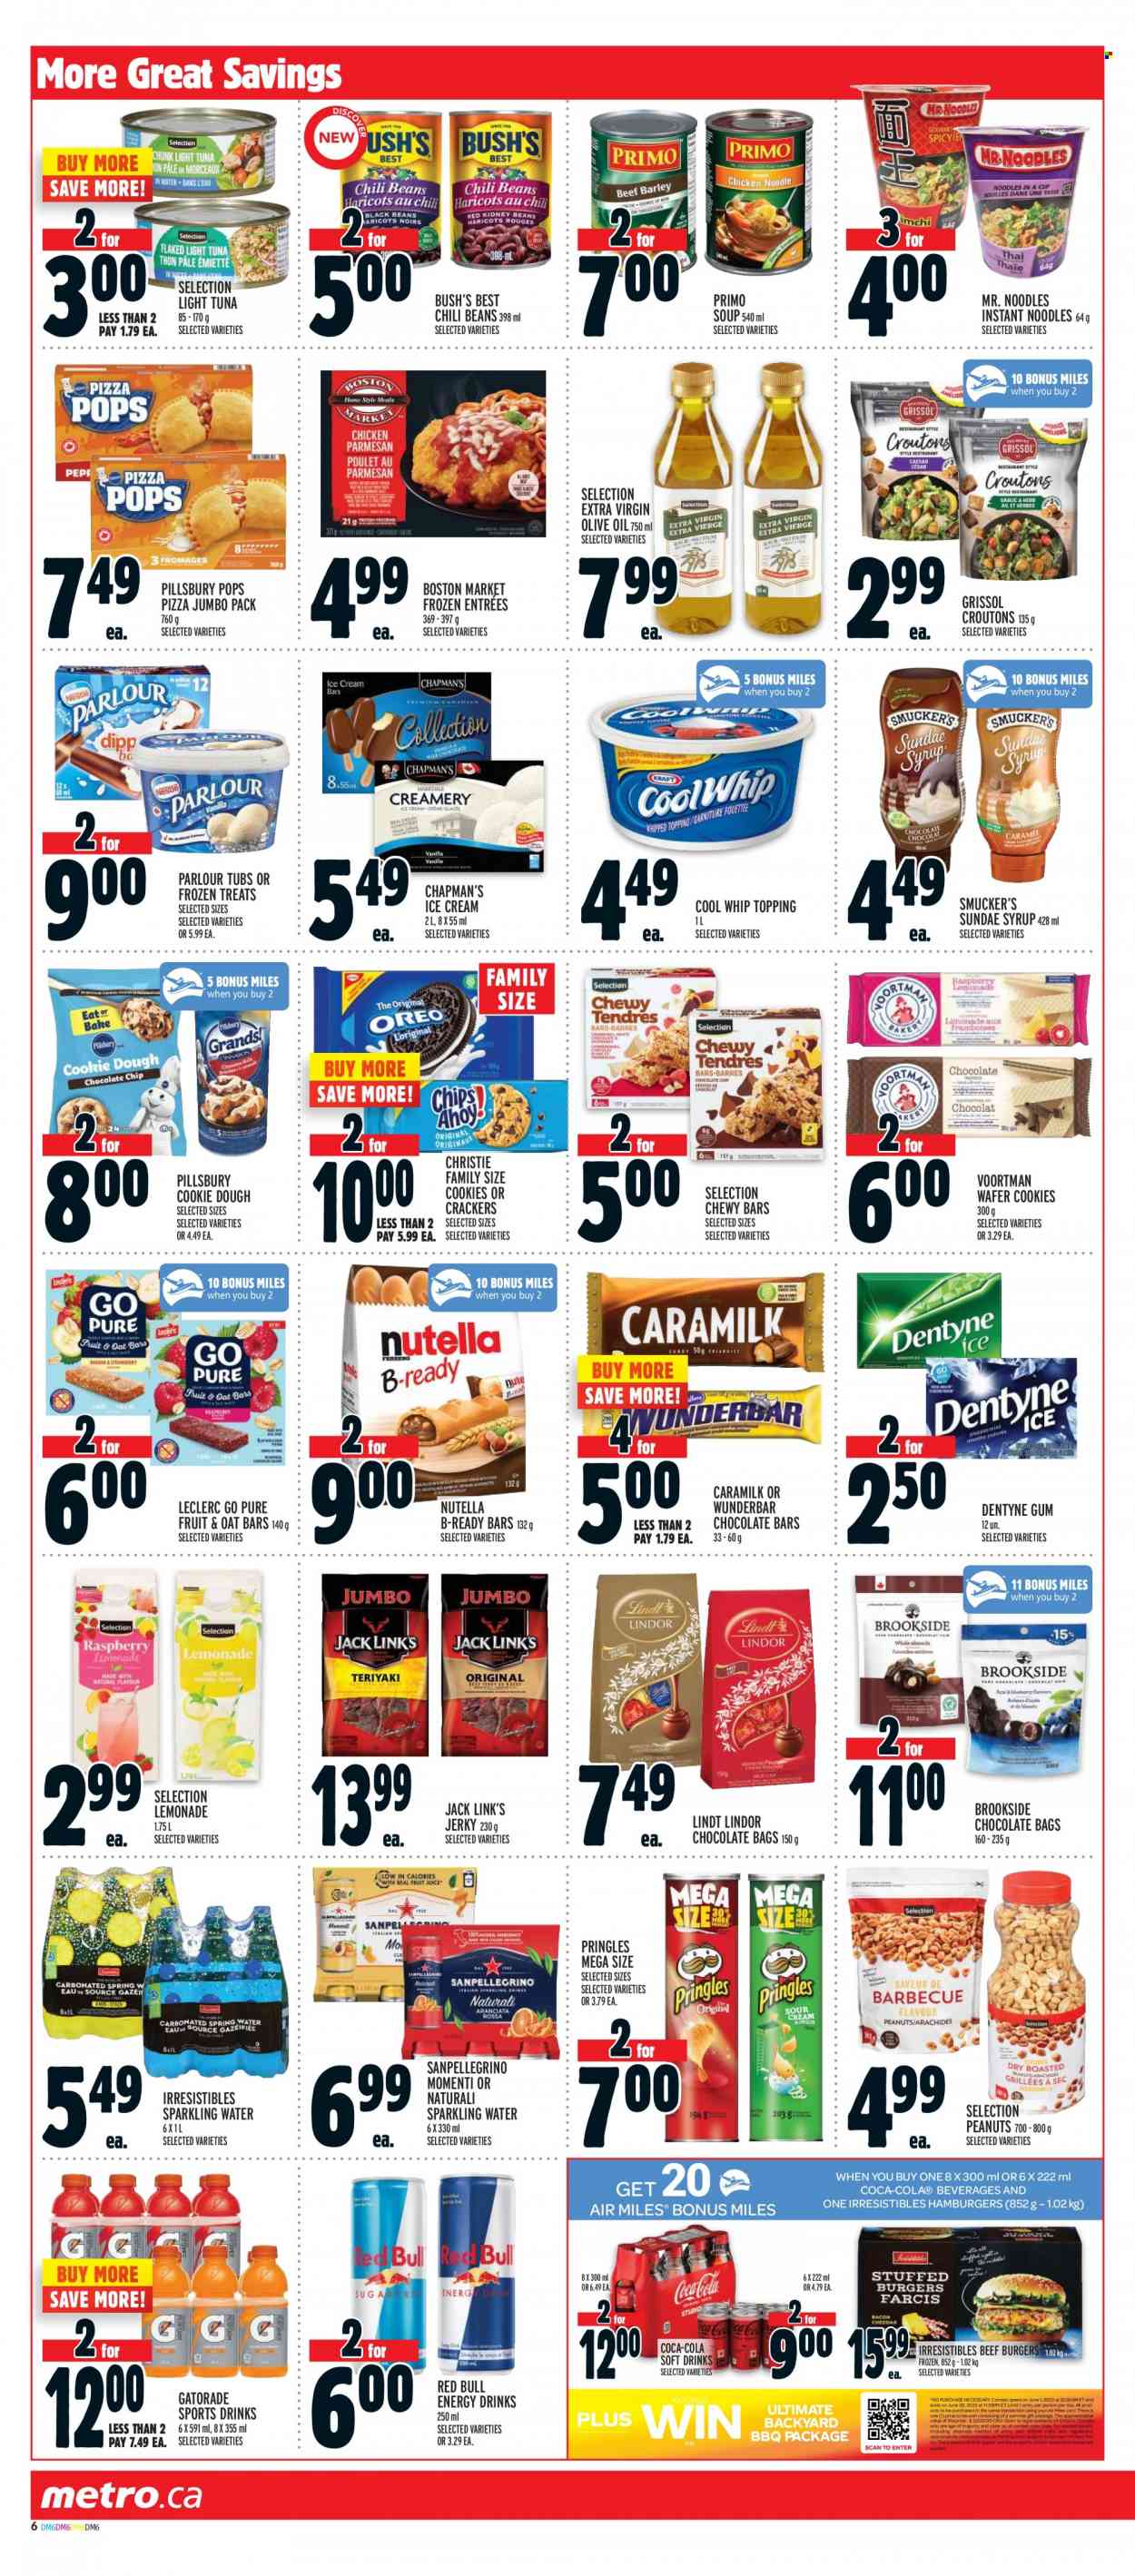 thumbnail - Metro Flyer - June 08, 2023 - June 14, 2023 - Sales products - beans, tuna, pizza, soup, hamburger, instant noodles, Pillsbury, noodles, beef burger, ready meal, jerky, Cool Whip, ice cream, cookies, wafers, crackers, chocolate bar, Pringles, Jack Link's, salty snack, croutons, topping, chili beans, light tuna, extra virgin olive oil, olive oil, oil, syrup, peanuts, Coca-Cola, lemonade, energy drink, soft drink, Red Bull, Gatorade, sparkling water, water, electrolyte drink, Nutella, Lindt, Lindor. Page 11.